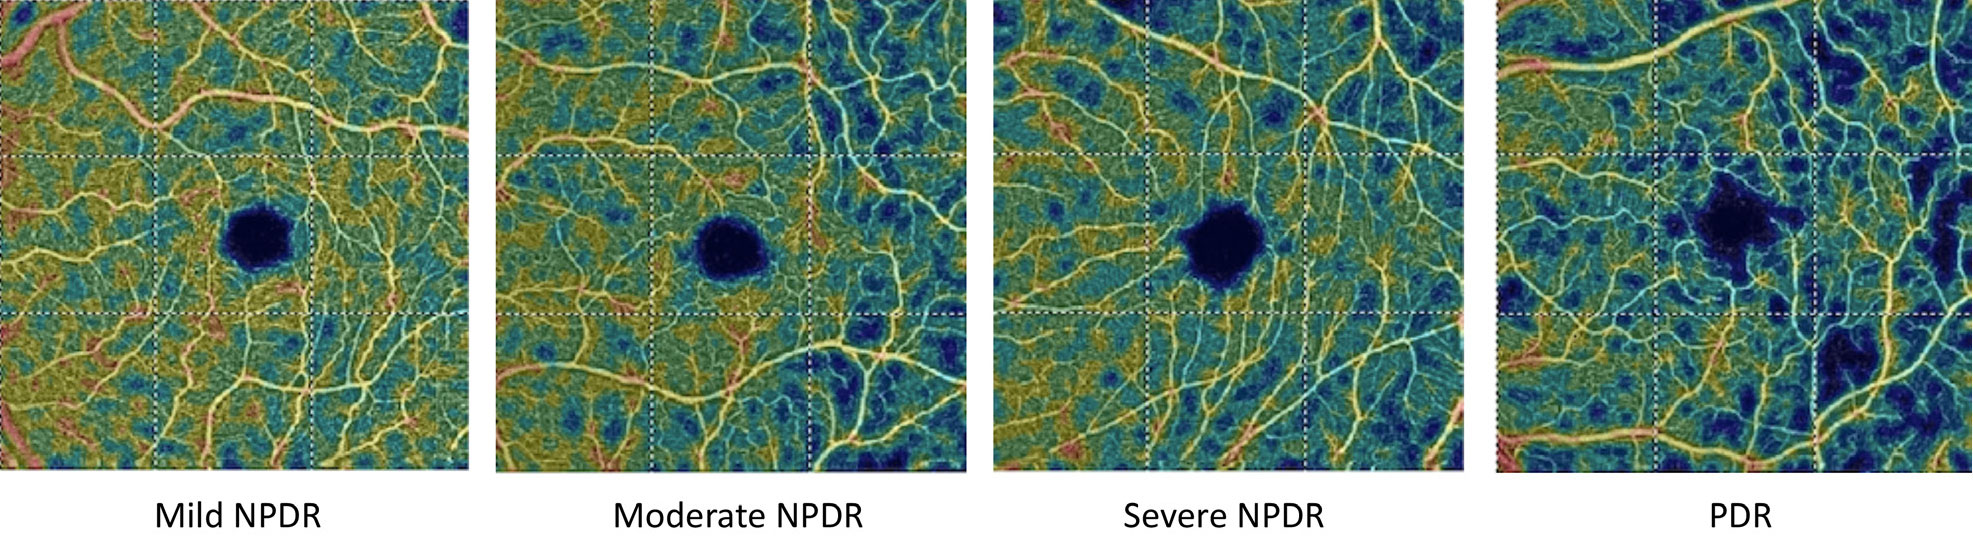 These OCT-A vessel density analysis images depict the decreased blood flow with increasing diabetic retinopathy severity.